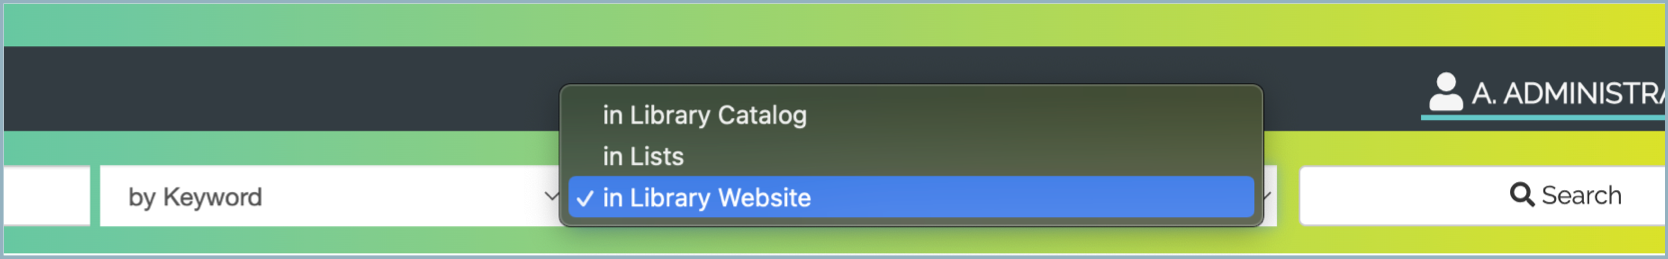 in Library Website search option